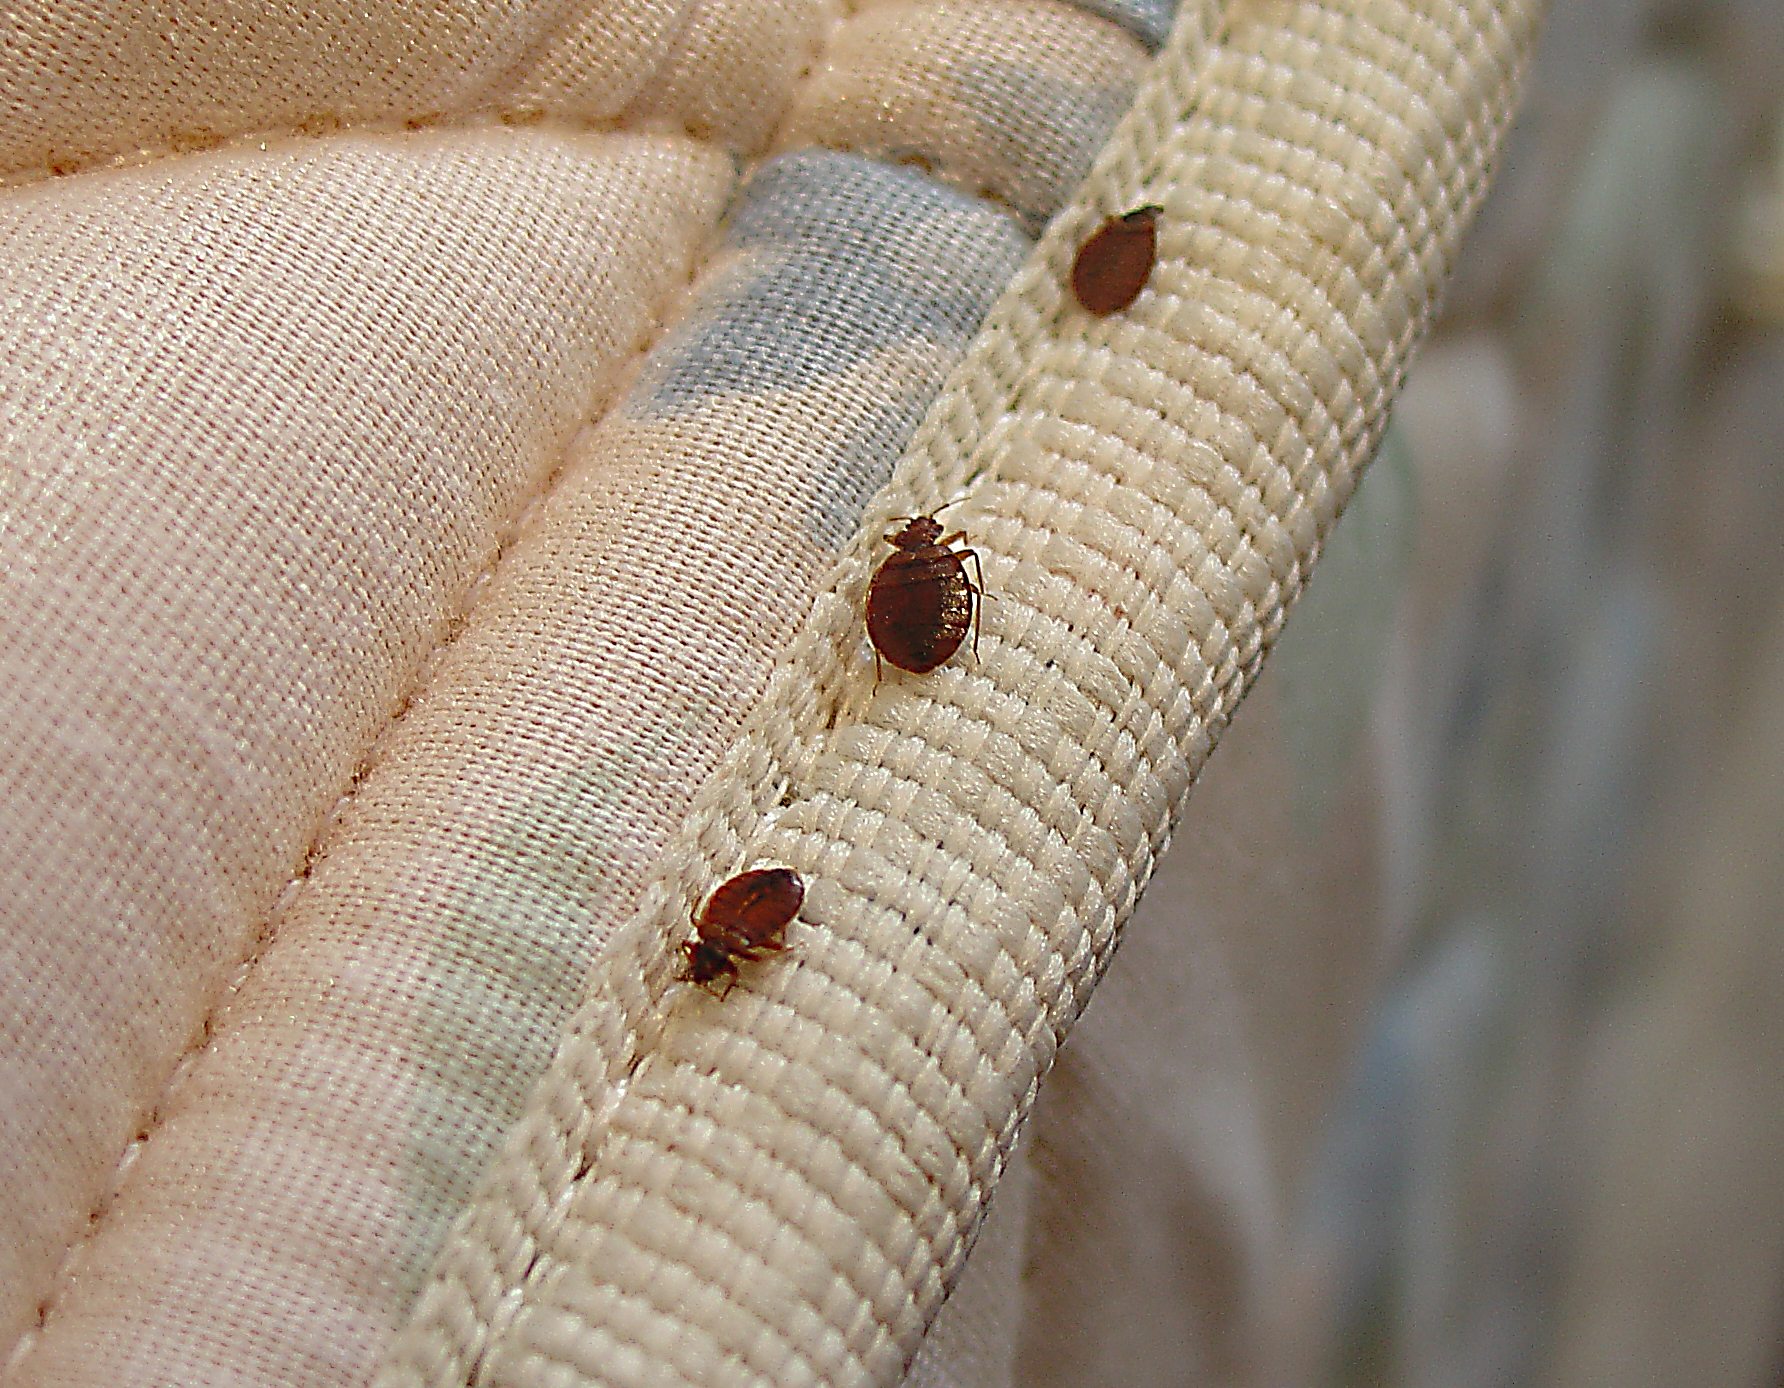 do all old mattresses have bed bugs